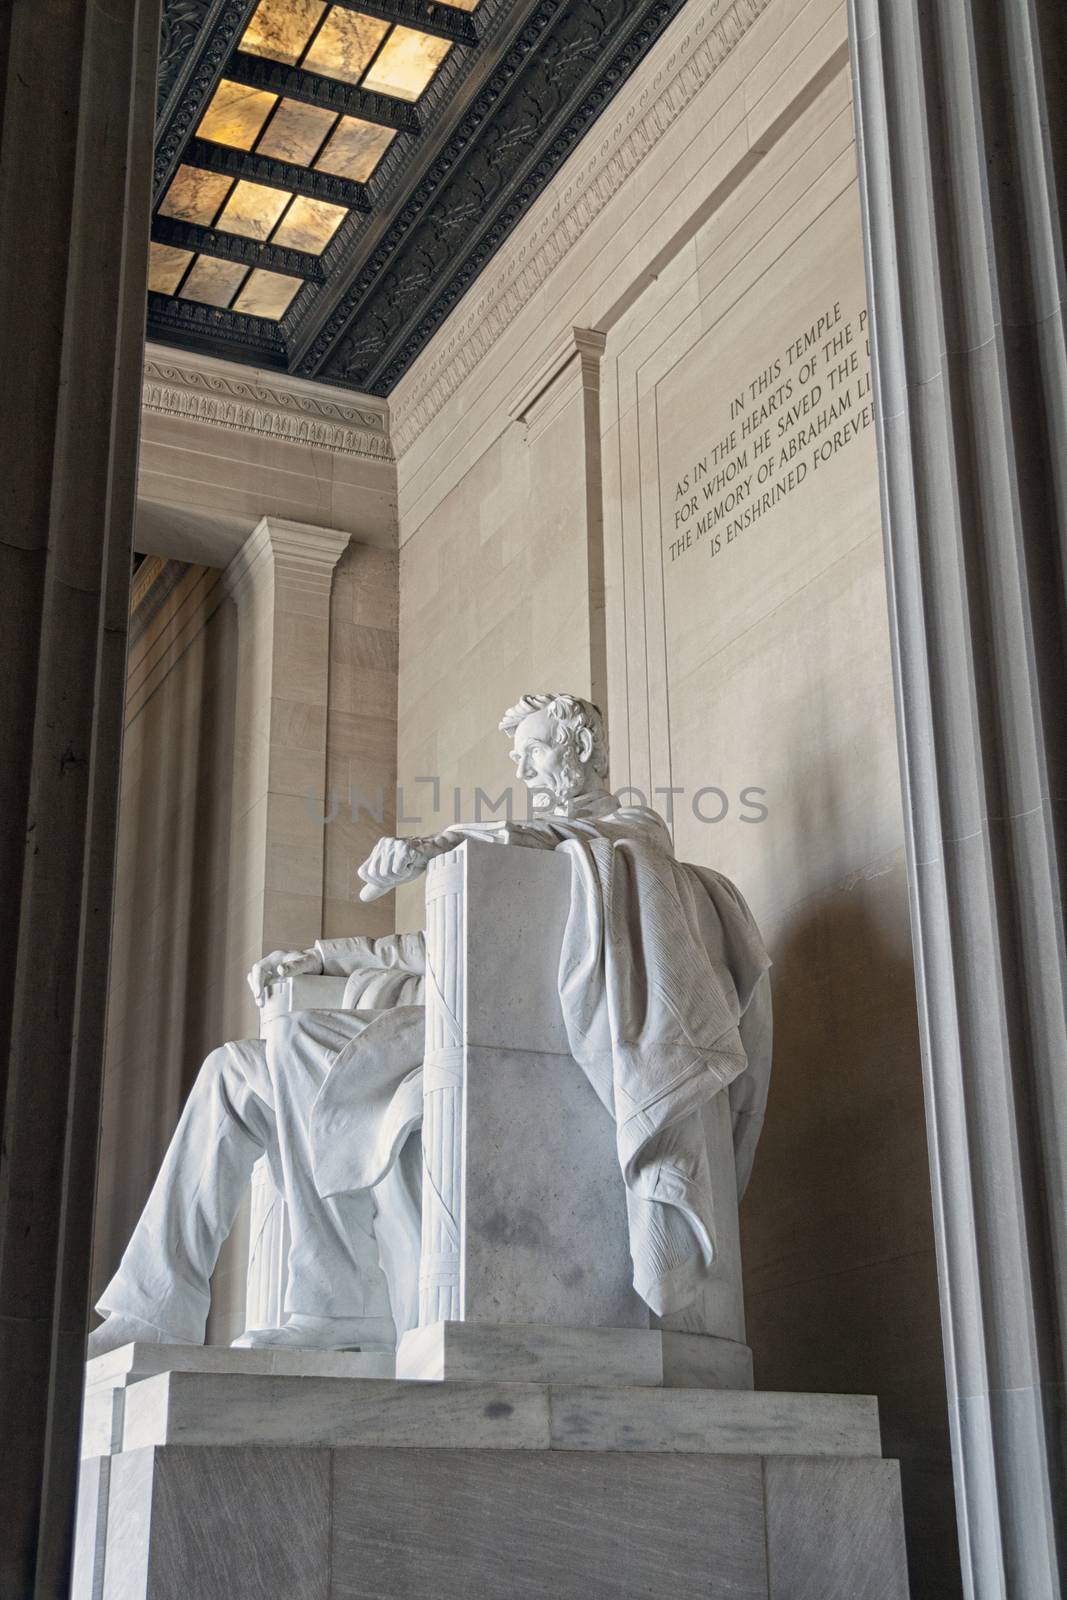 The Abraham Lincoln statue in Washington D.C.